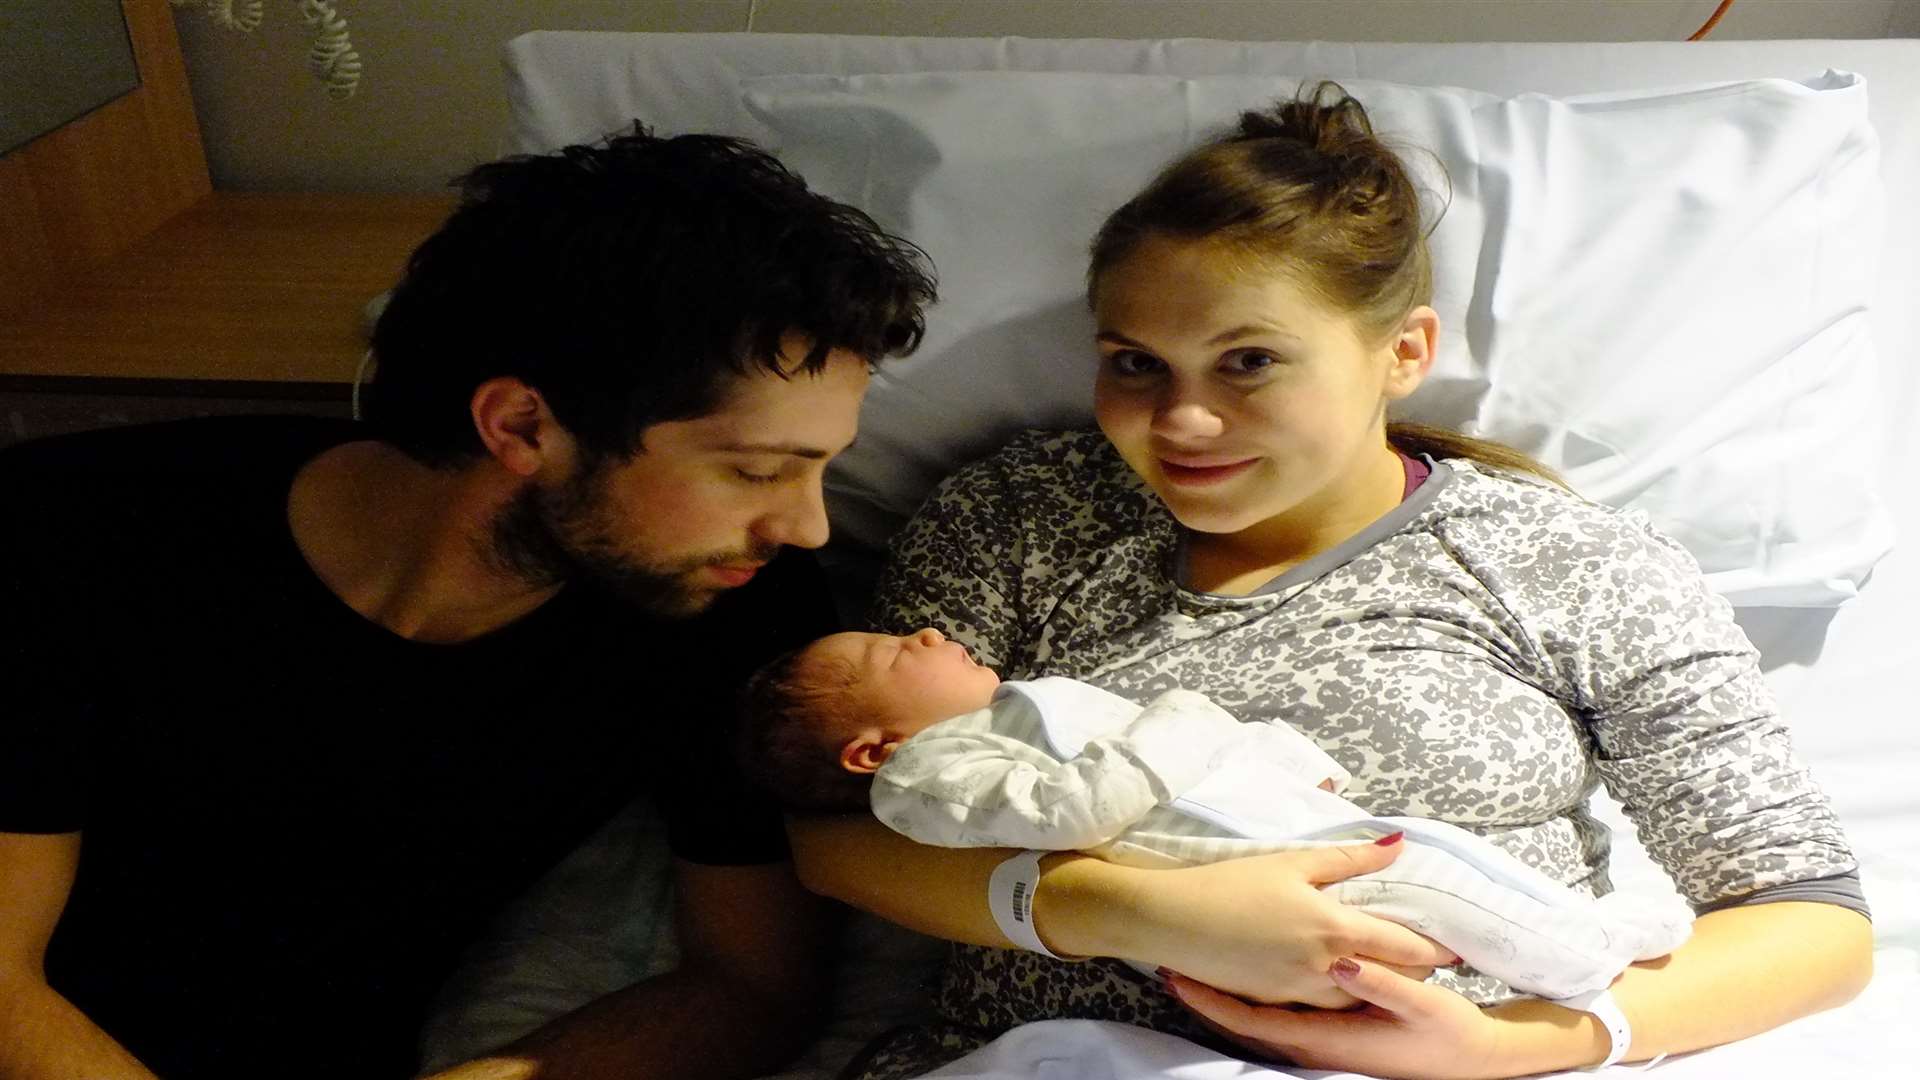 Baby Alfred George born at 1.30am on New Year's Day weighing 7lb 14oz. Pictured with mum Stacey Jeves and partner George Atkin from Sidcup